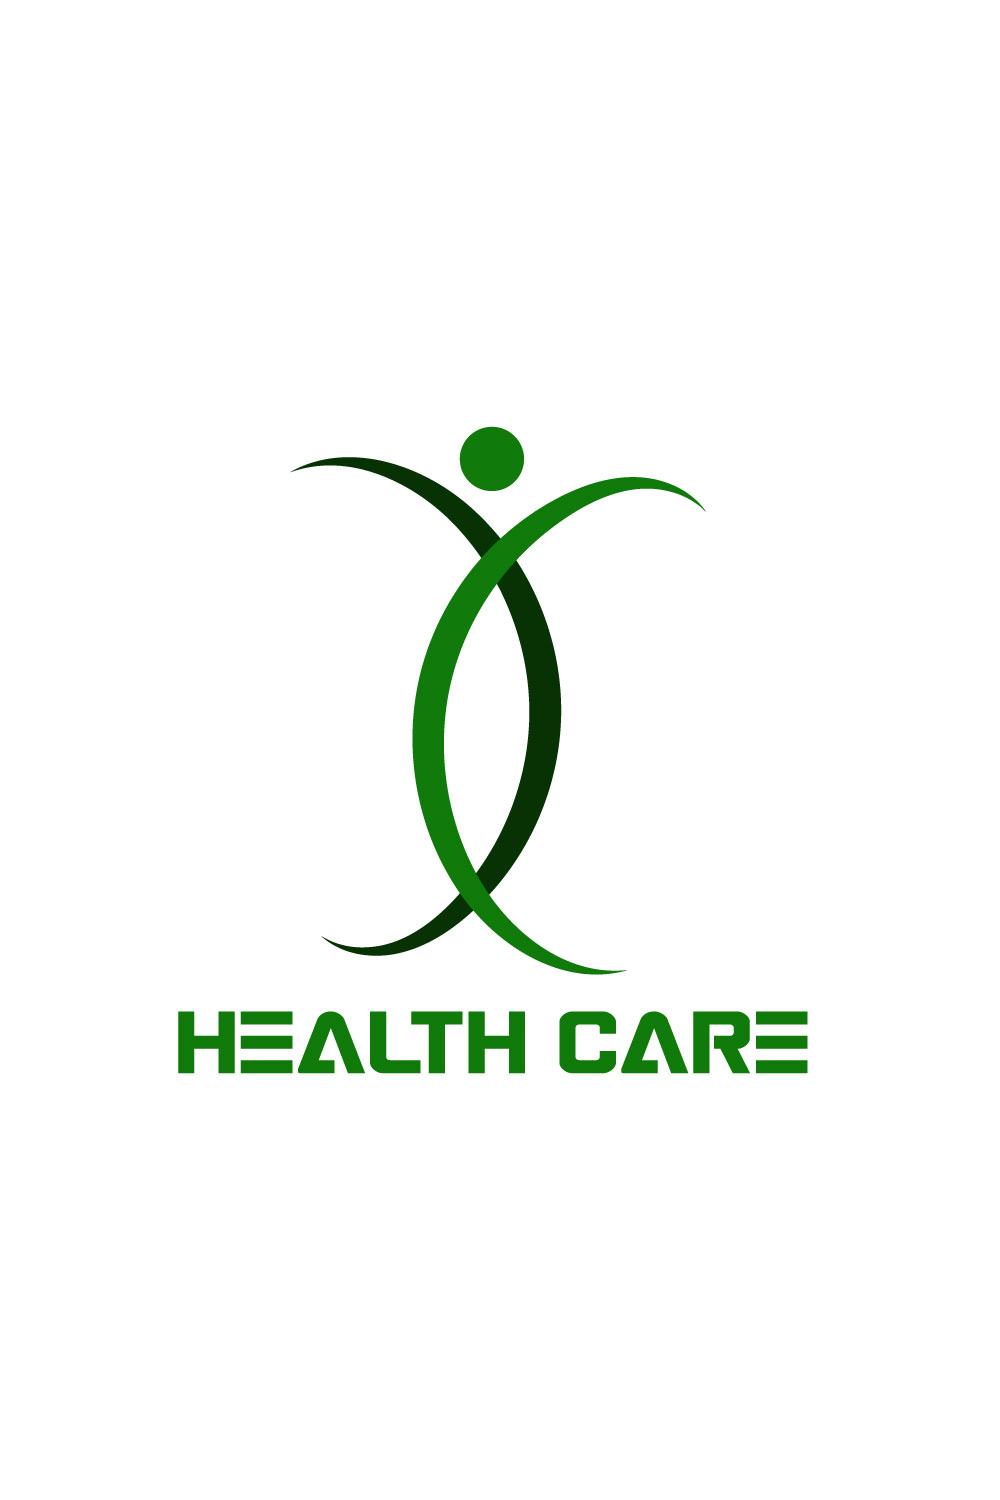 Free Empowering Health logo pinterest preview image.